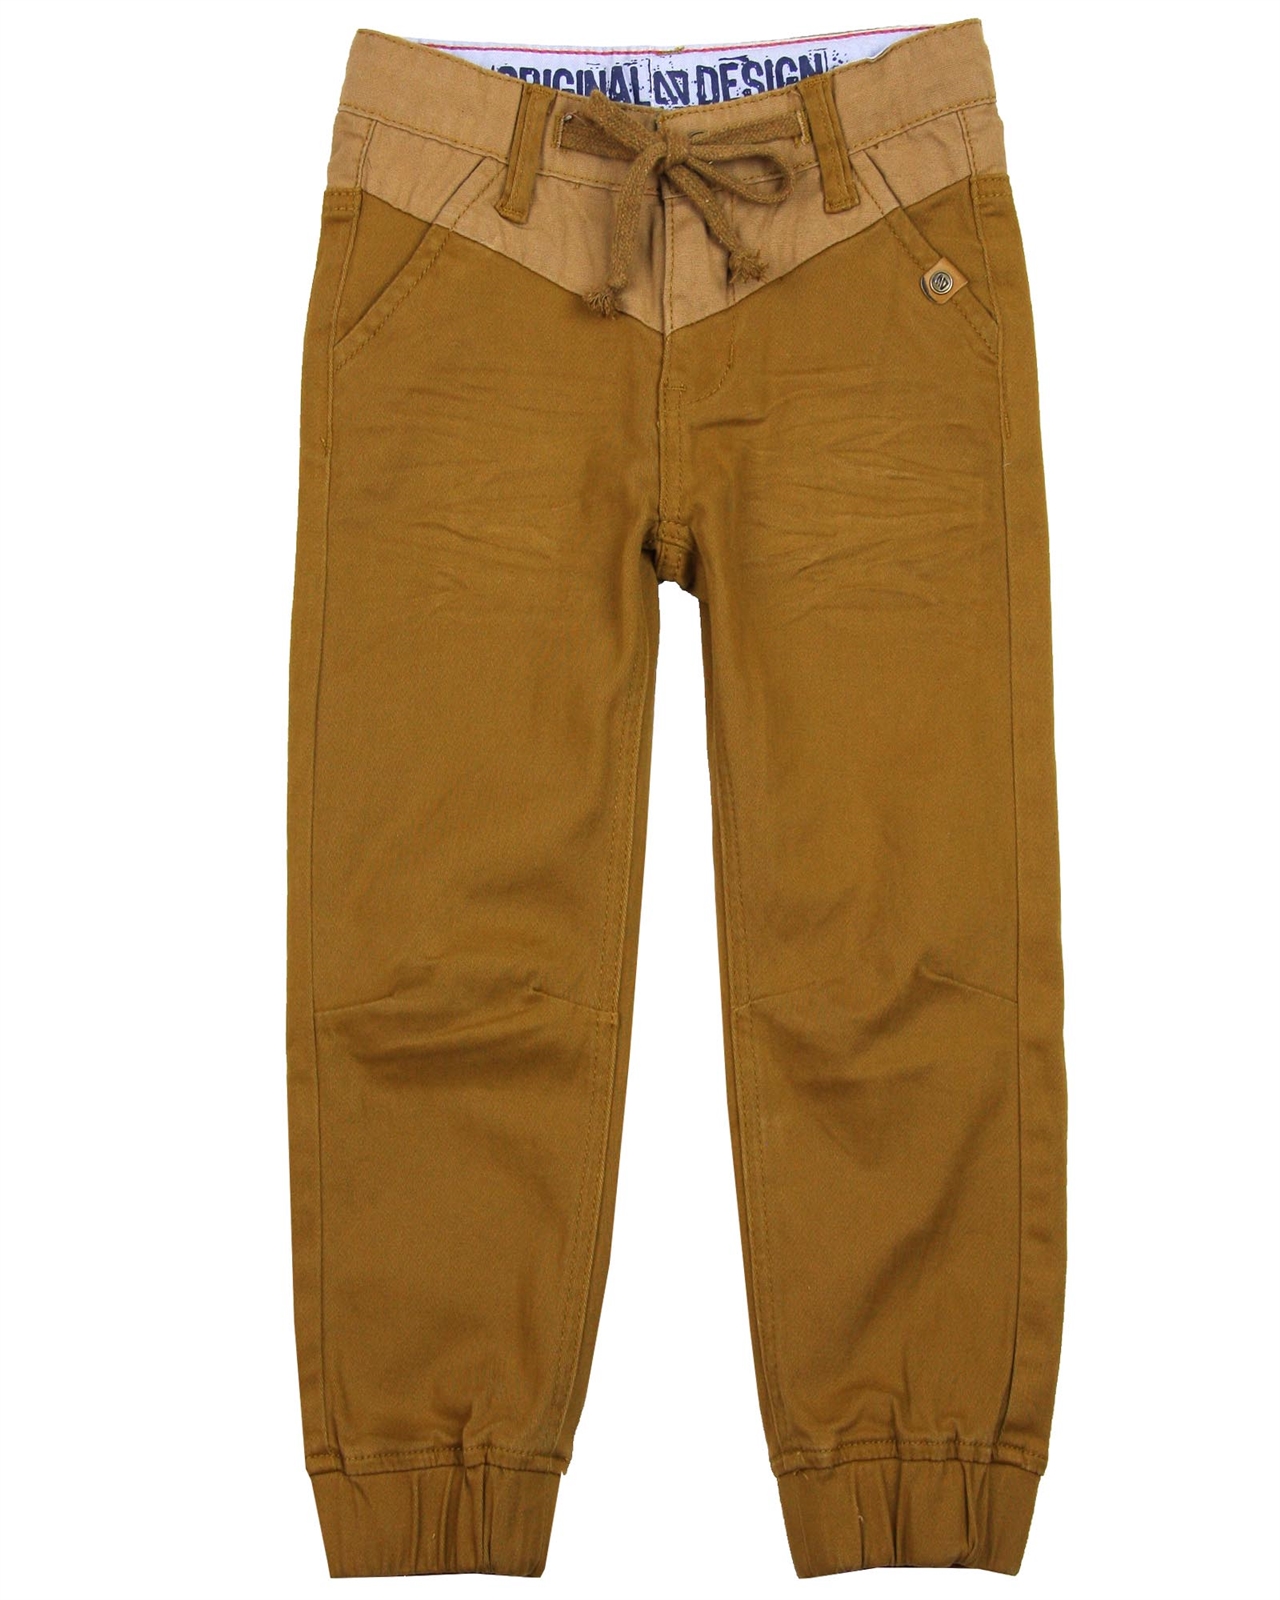 NANO Boys' Twill Pants with Elastic Cuffs in Brown, Sizes 2-12